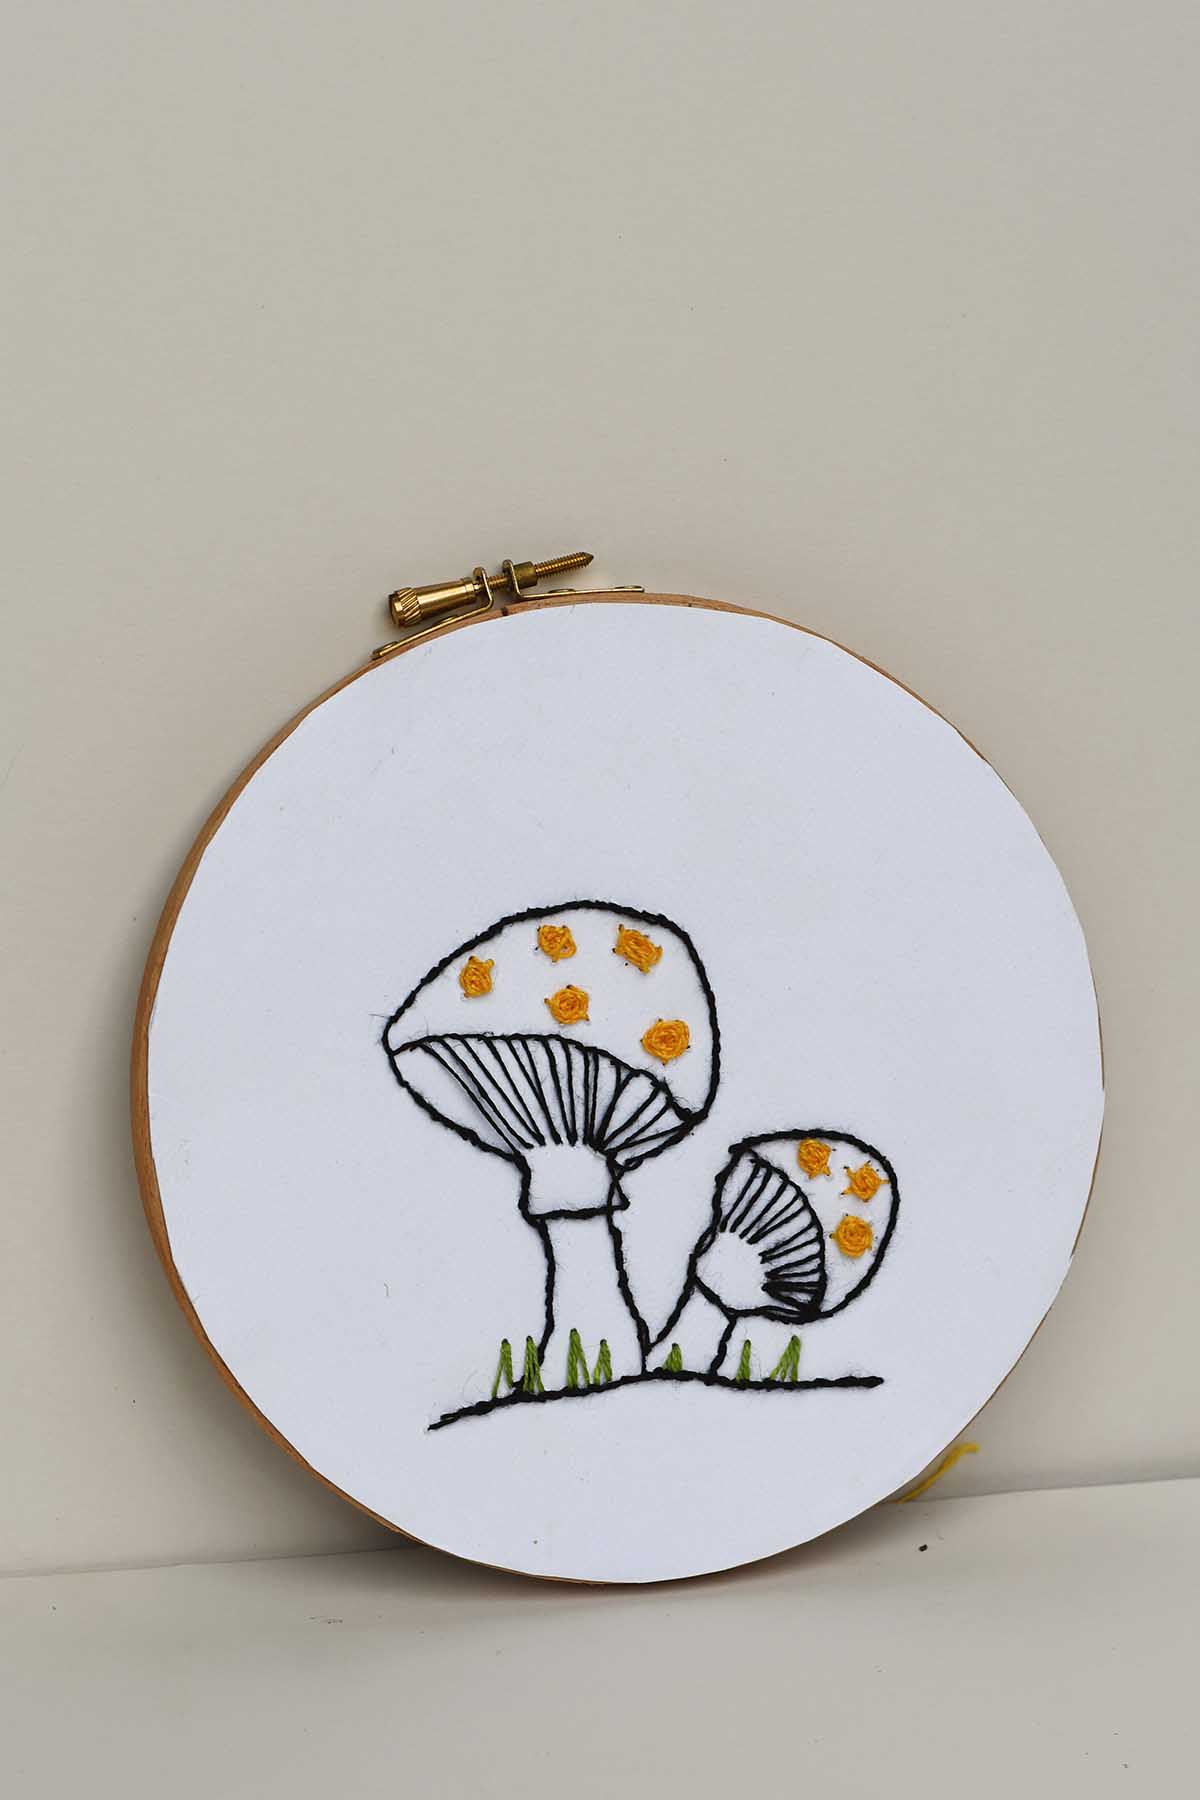 Paper embroidery on a hoop